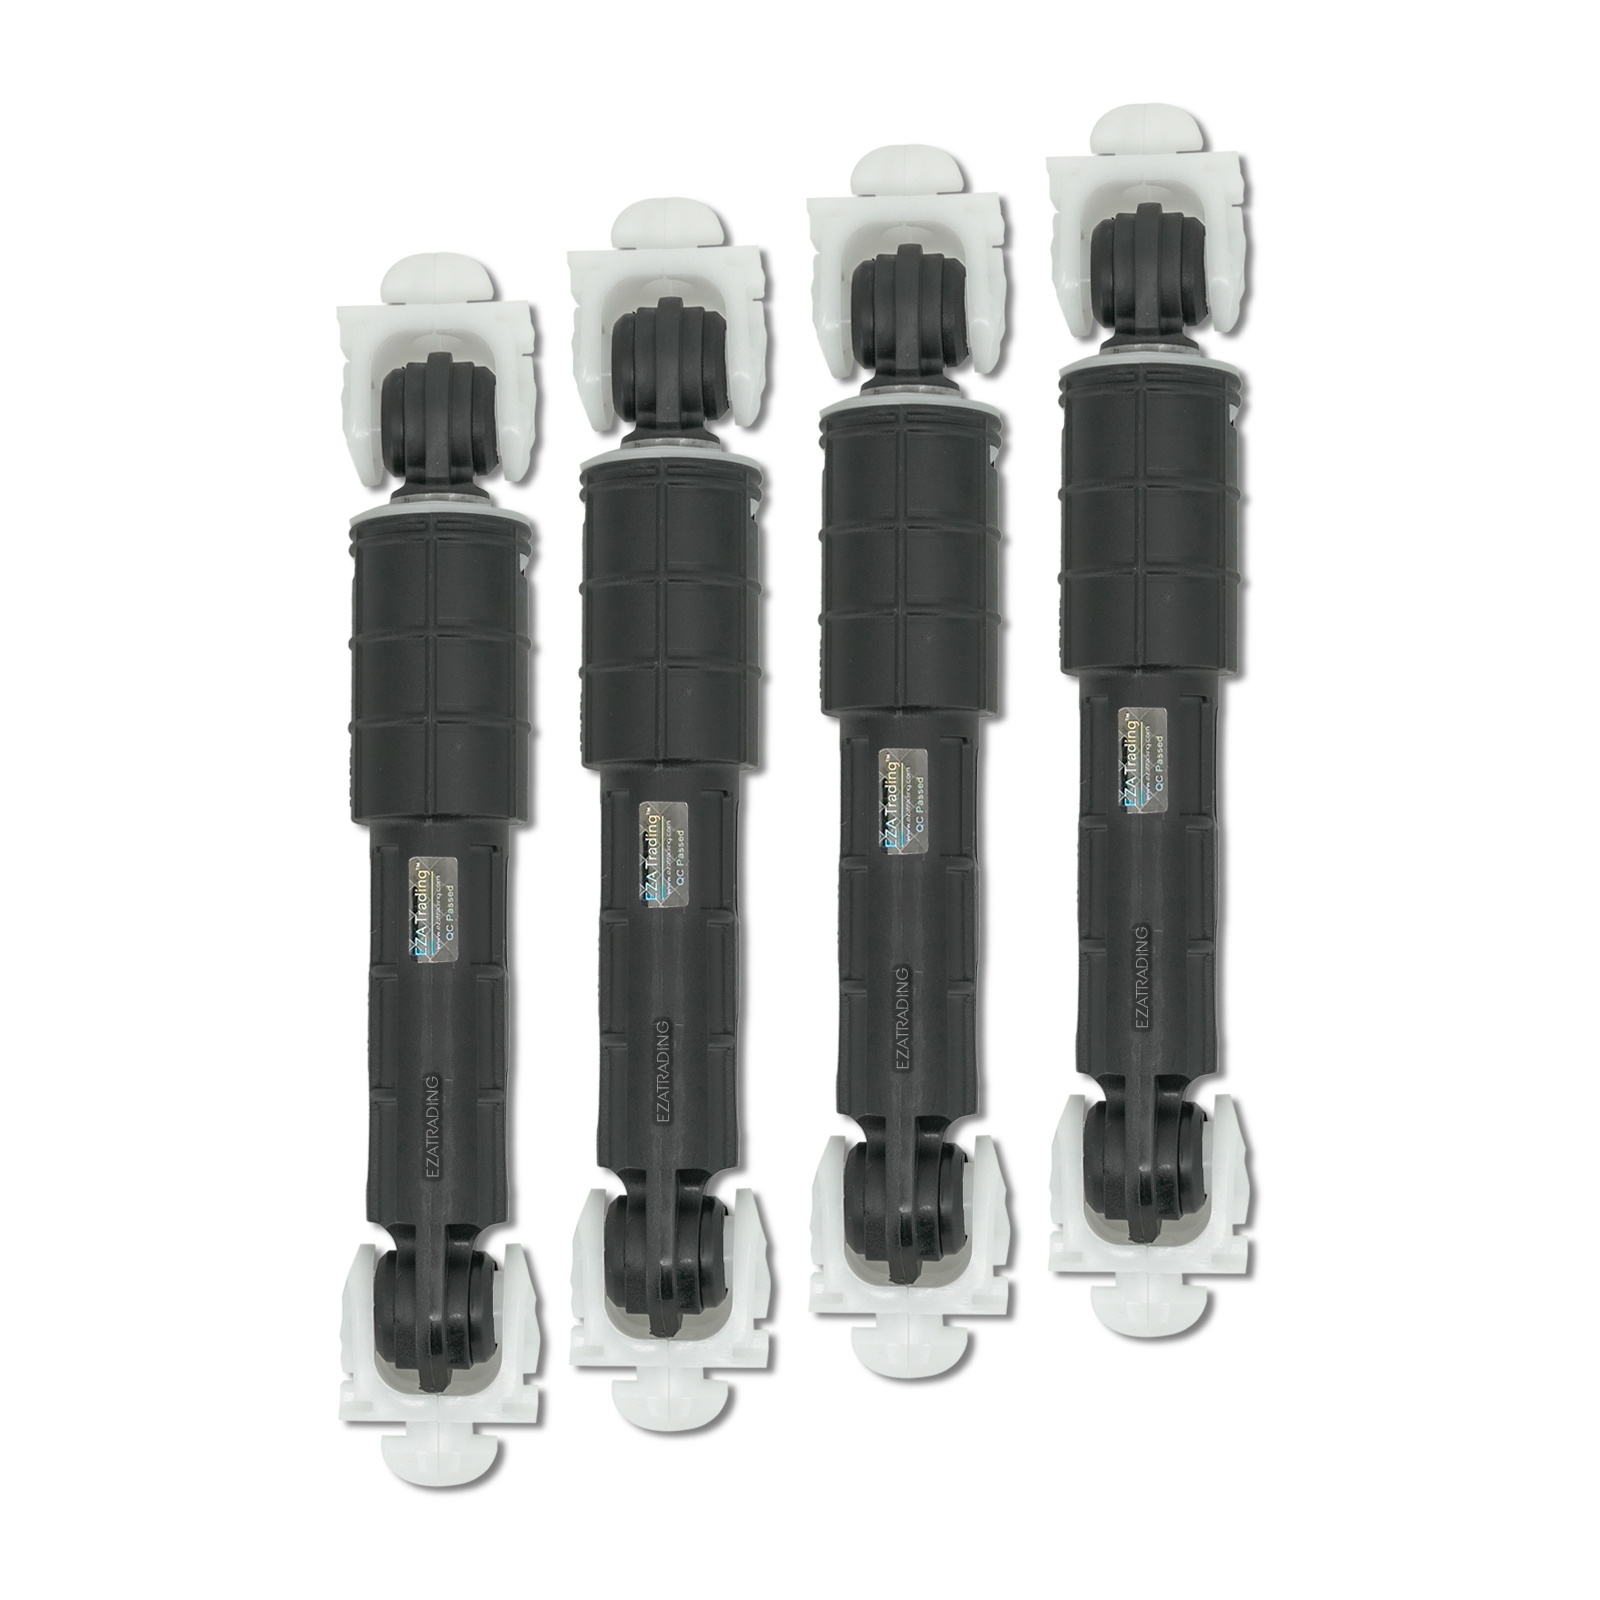 8182812 Washer Shock Absorber for Whirlpool, Maytag, Kenmore/Sears Washers  - 4 Pack - 1 Year Warranty